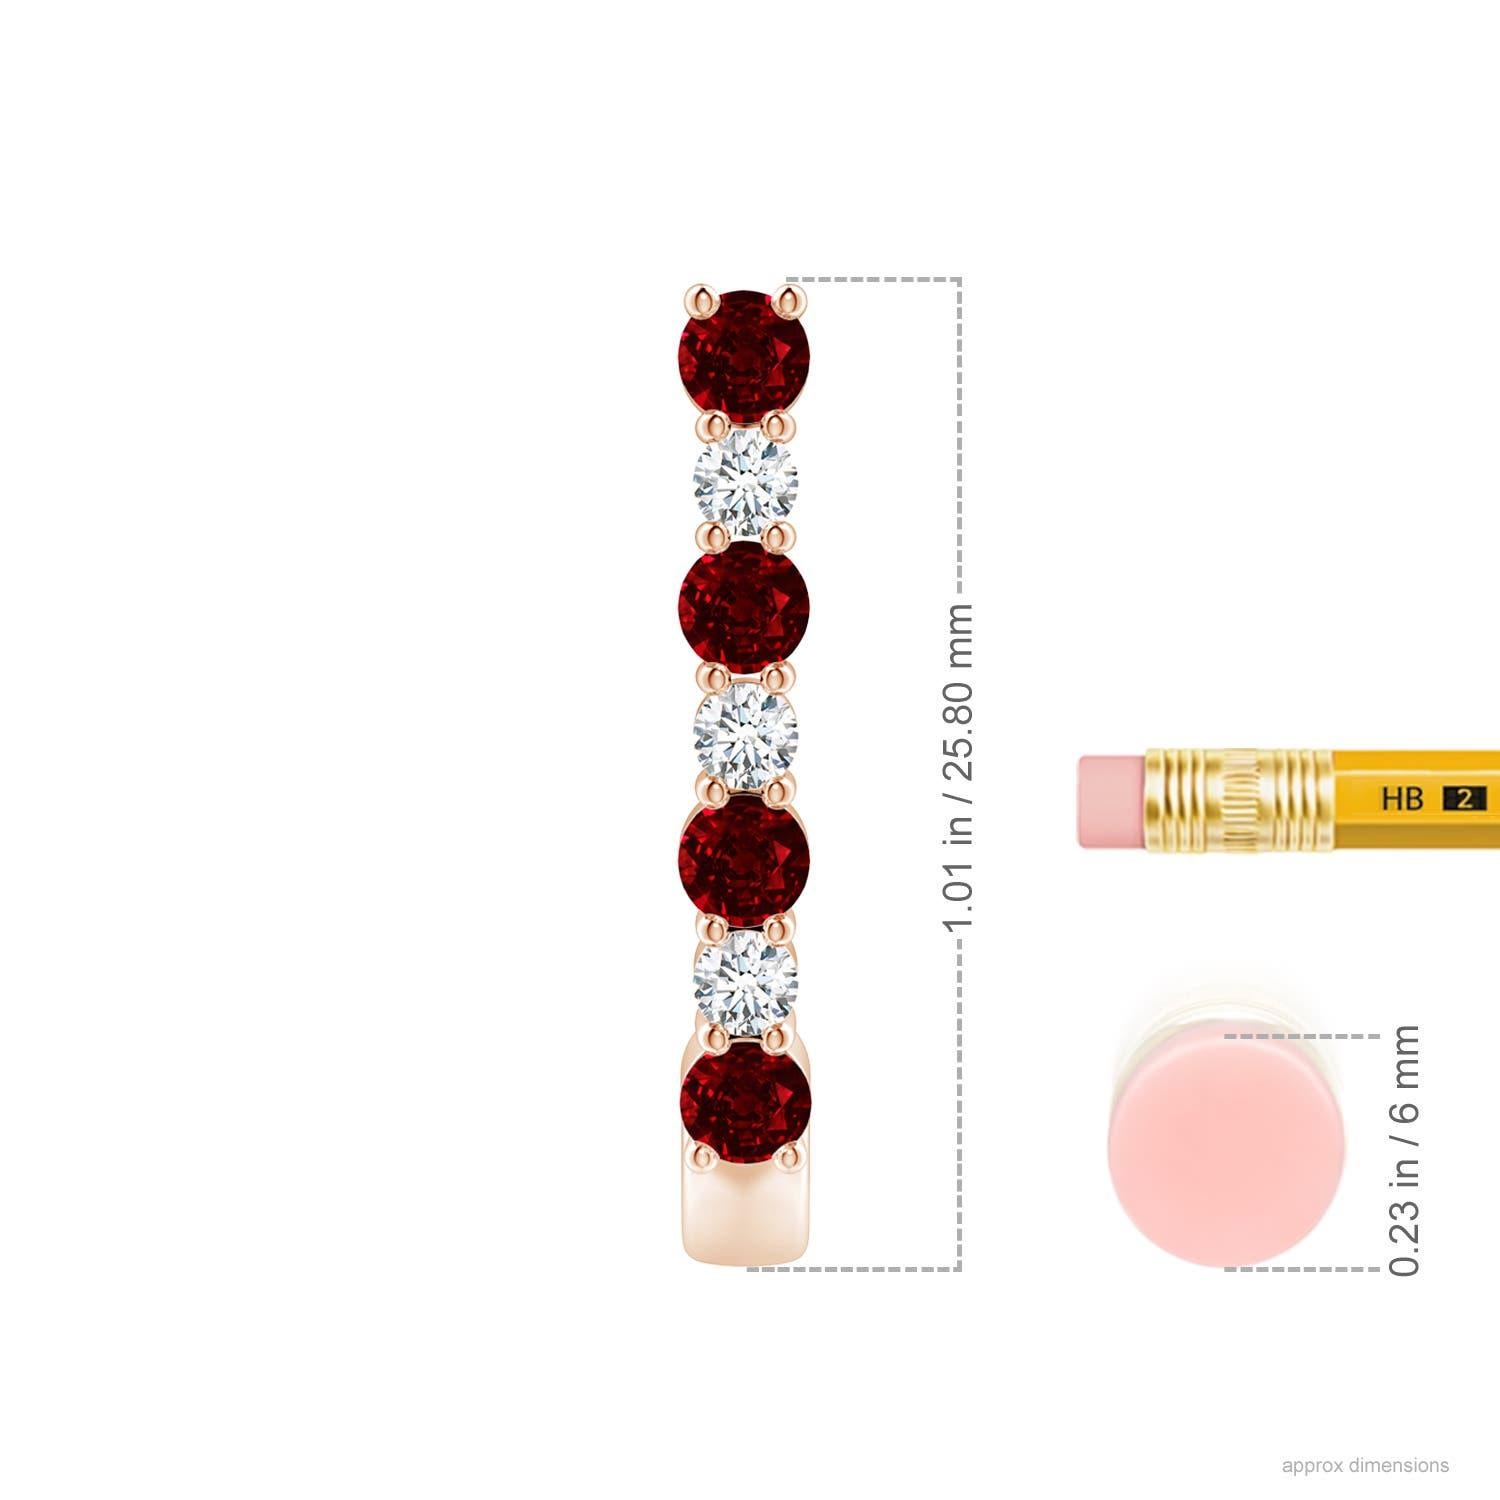 These stunning ruby and diamond hoop earrings are exquisitely crafted in 14k rose gold. The J hoops are alternately studded with bright red rubies and sparkling diamonds for a captivating effect.
Ruby is the Birthstone for July and traditional gift